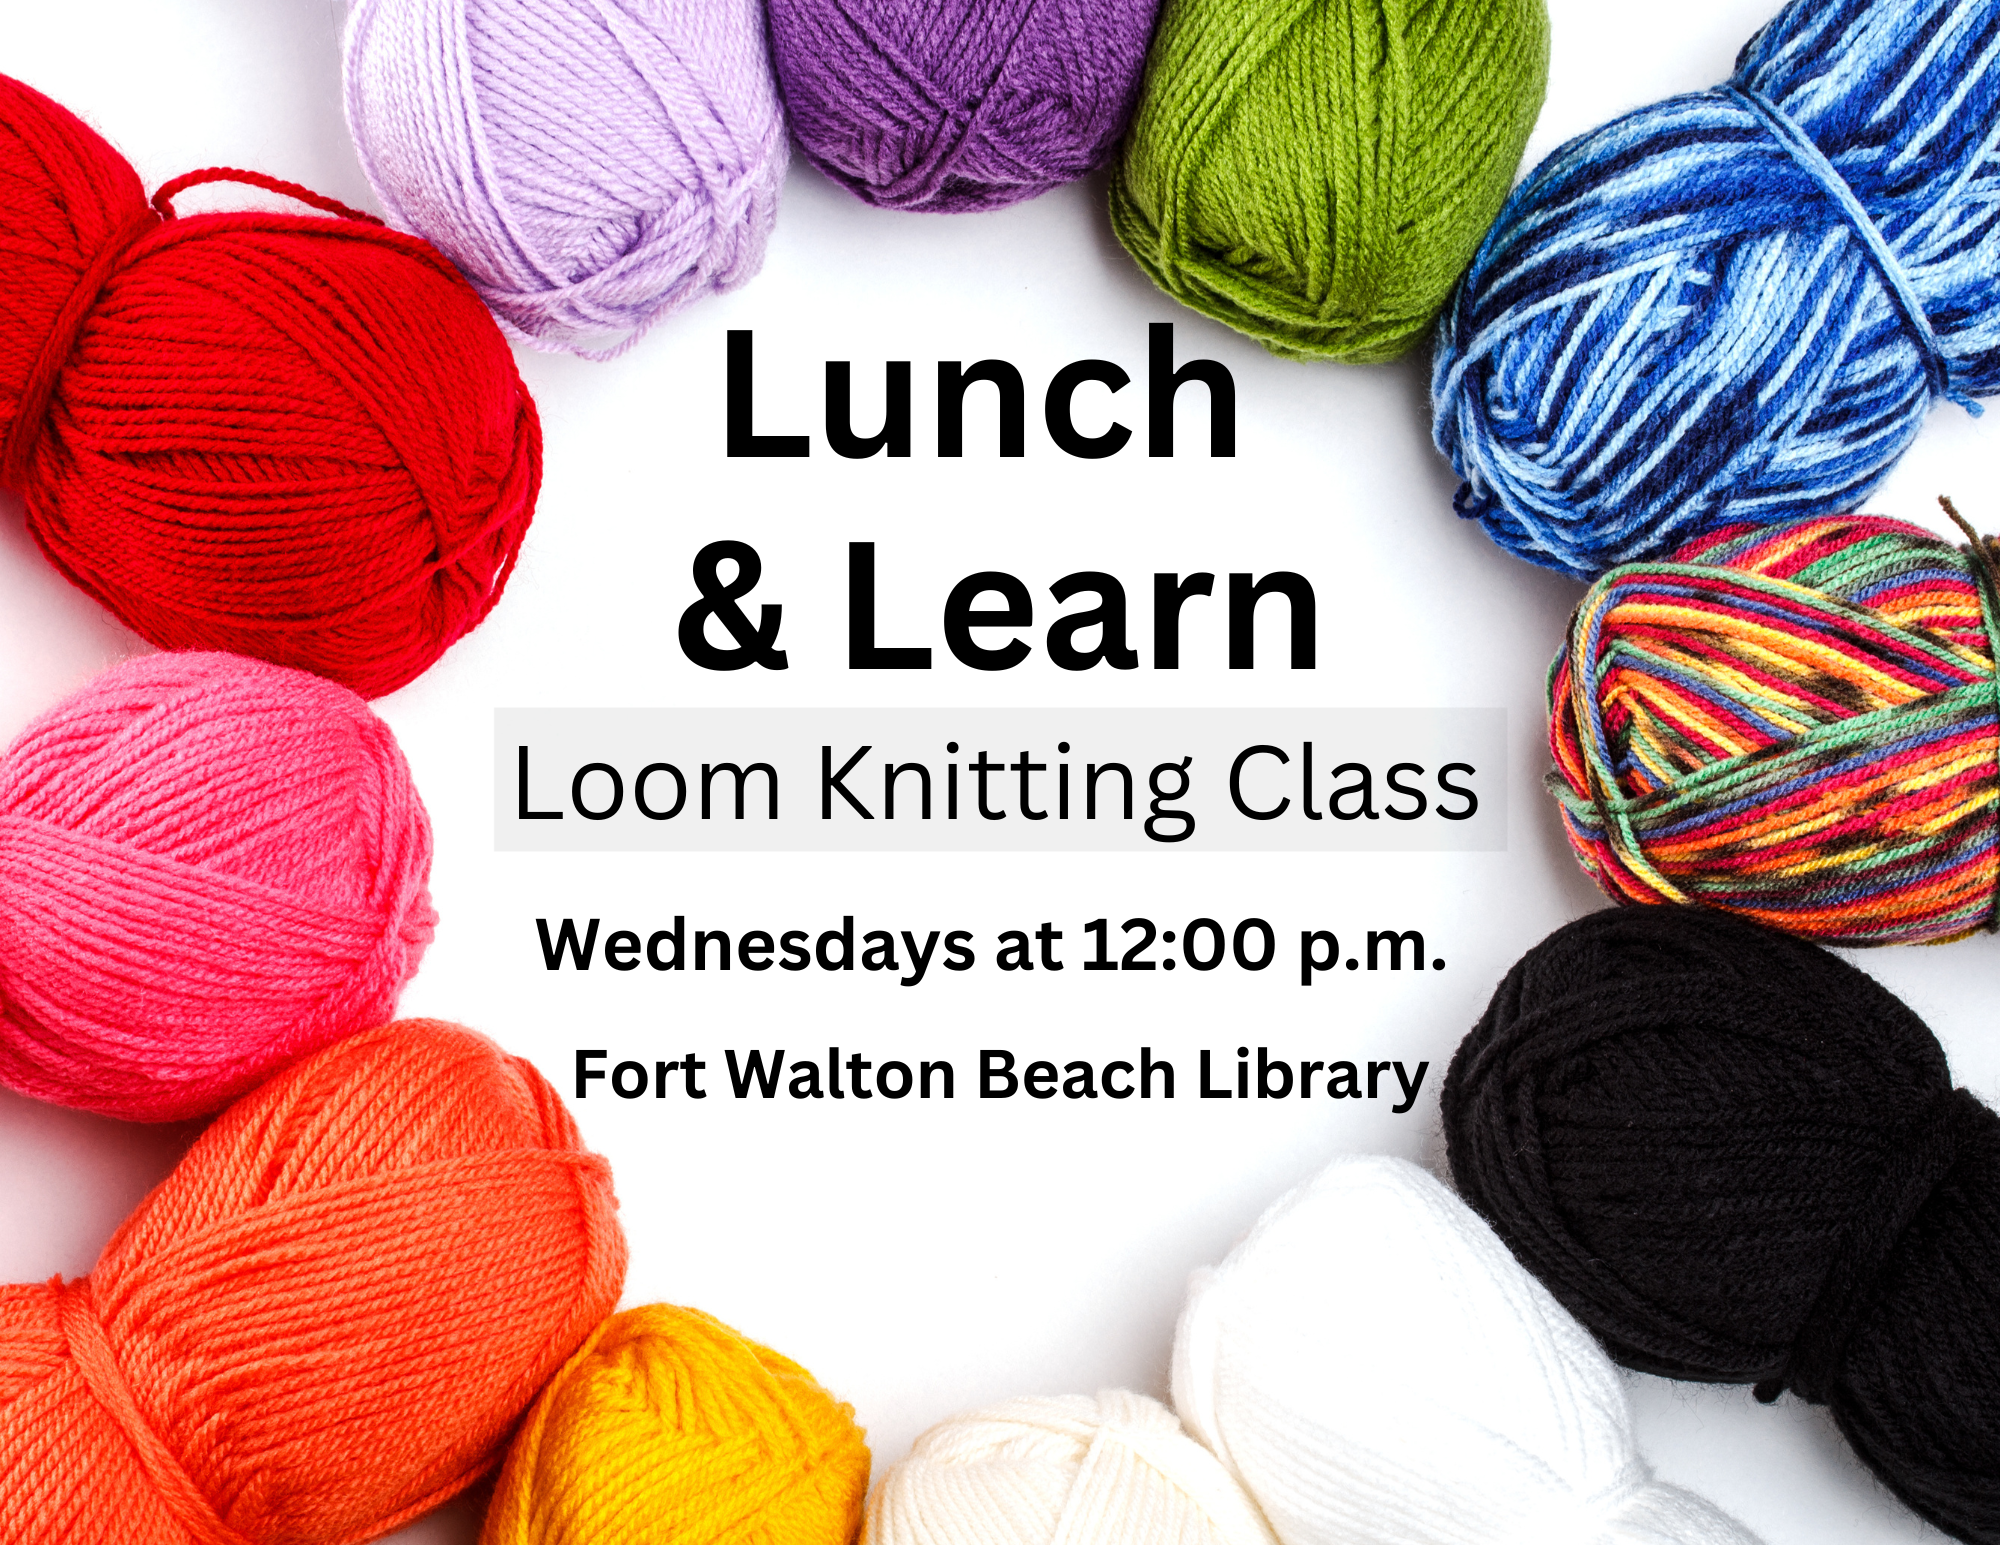 Loom Knitting Class every Wednesday at 12 pm at the FWB Library